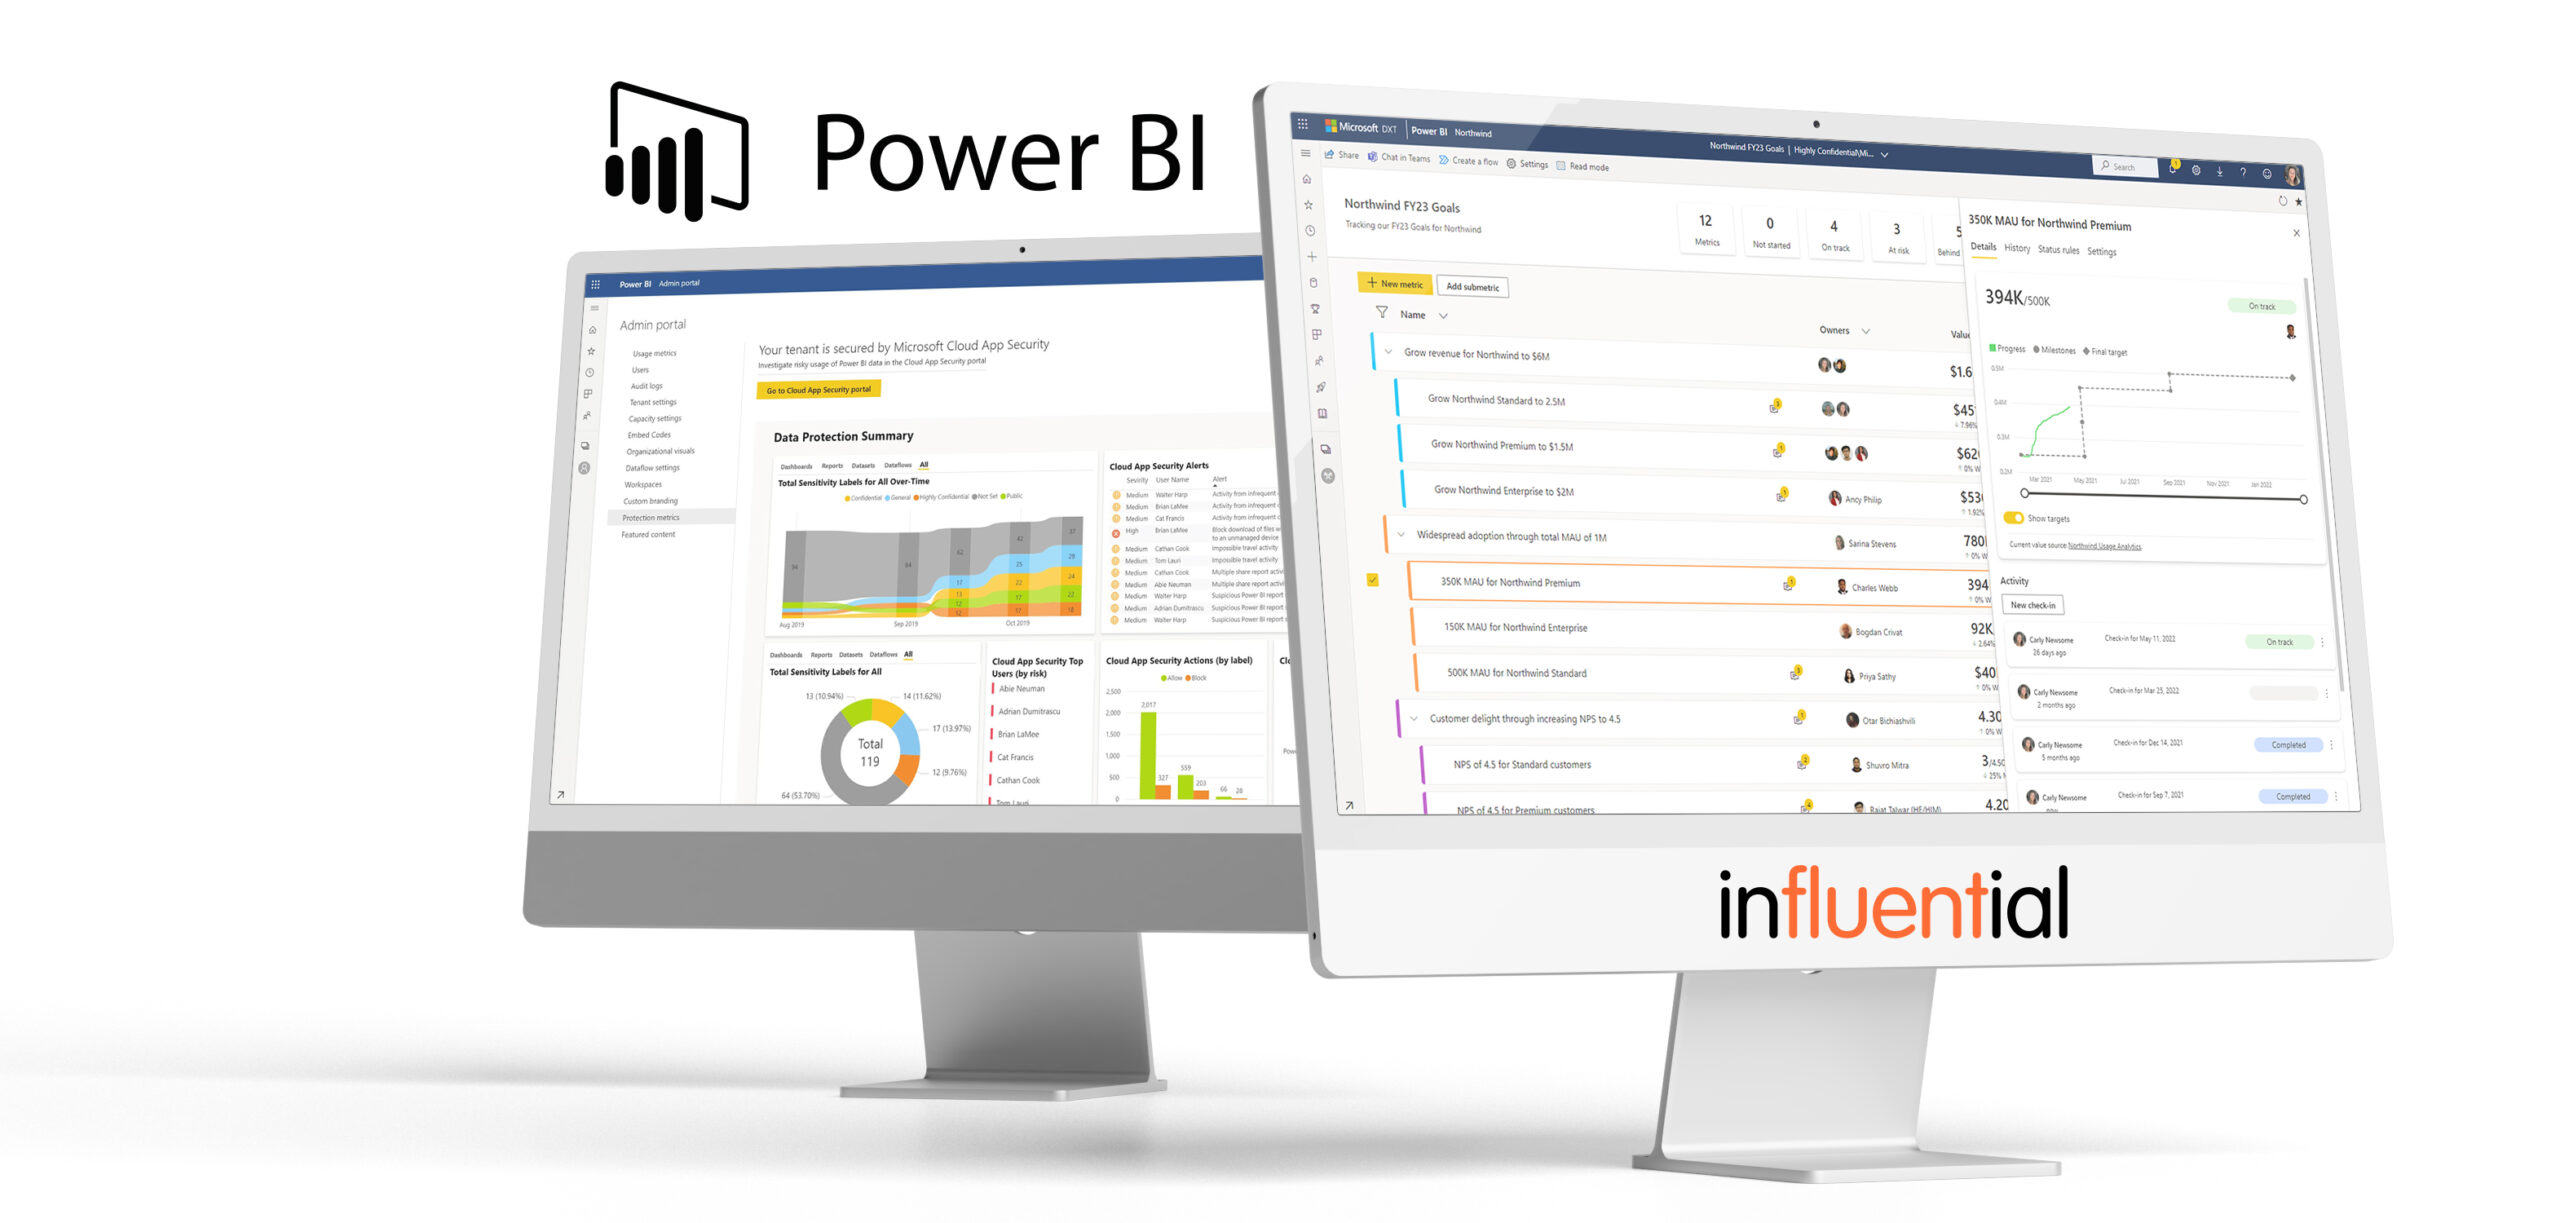 Two computer screens showing Power BI dashboards with Influential and Power BI logo